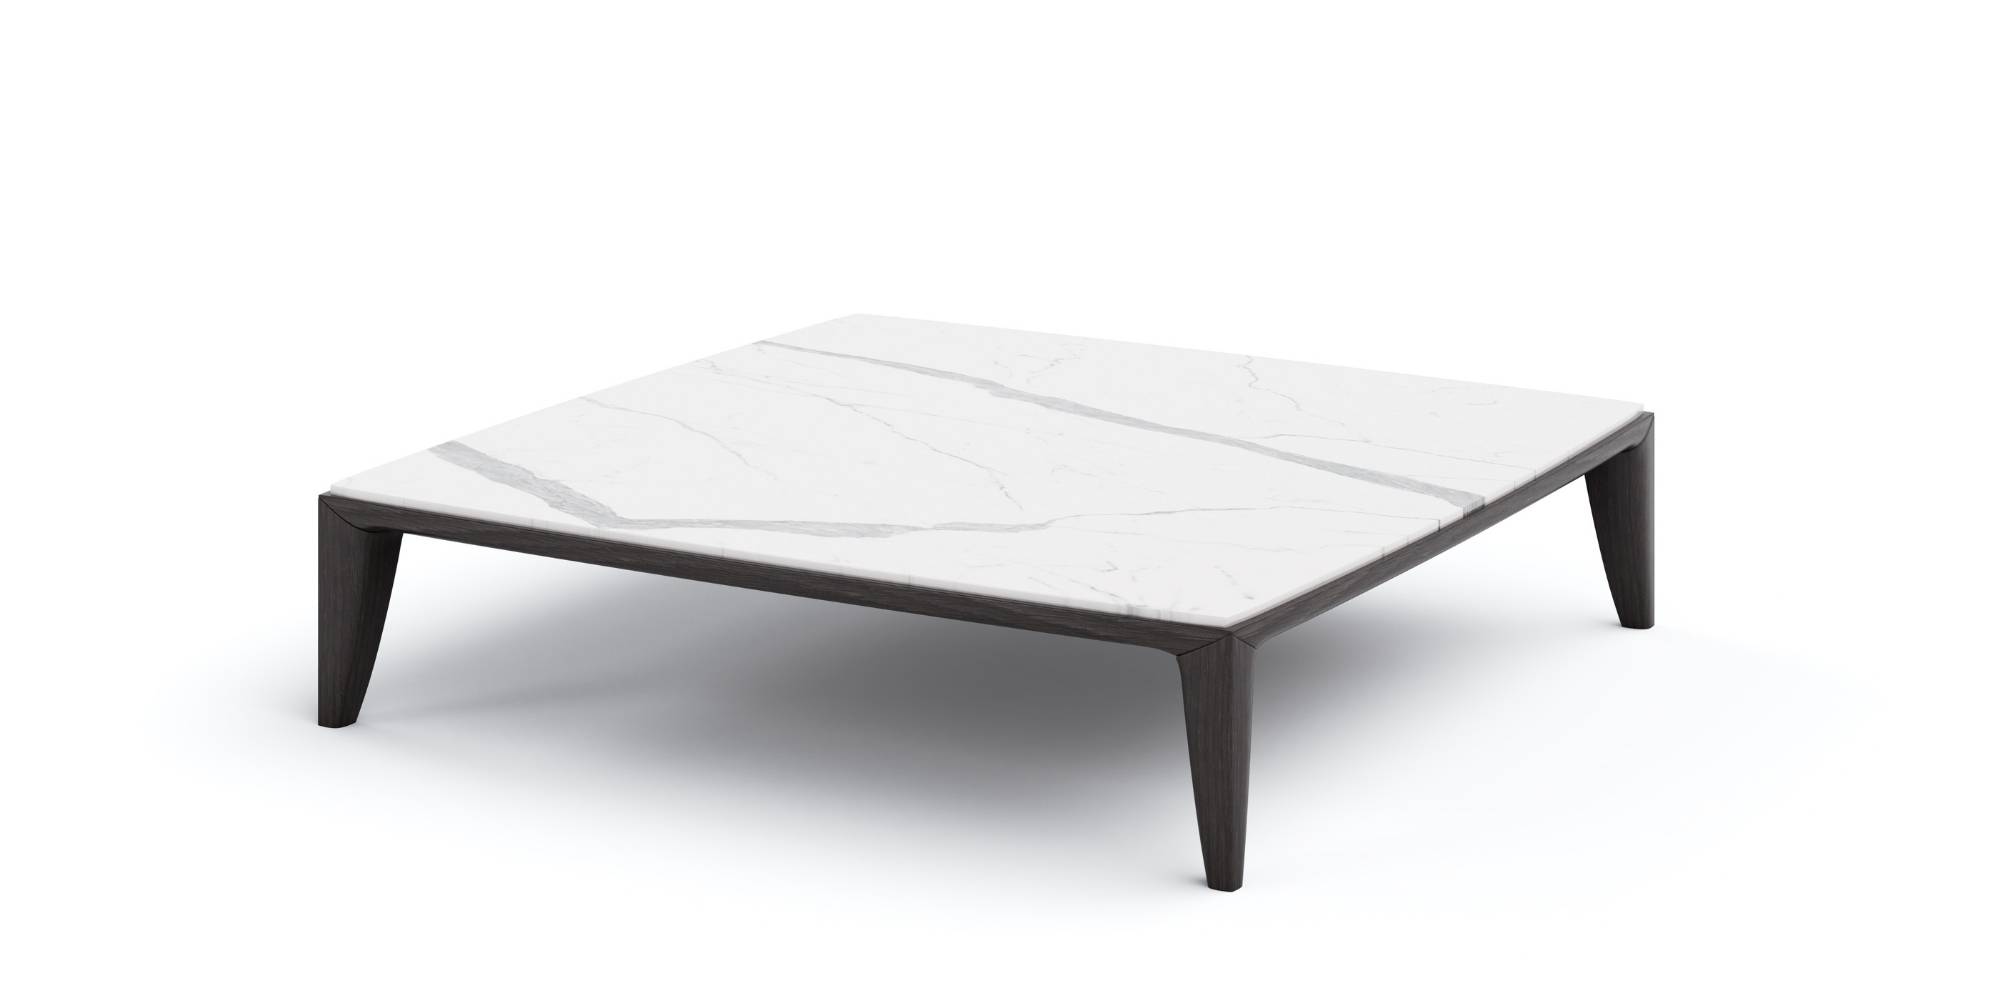 Aquila Coffee Table 60 – Medium in Outdoor Tables Coffee Tables for Asteri Lusso collection